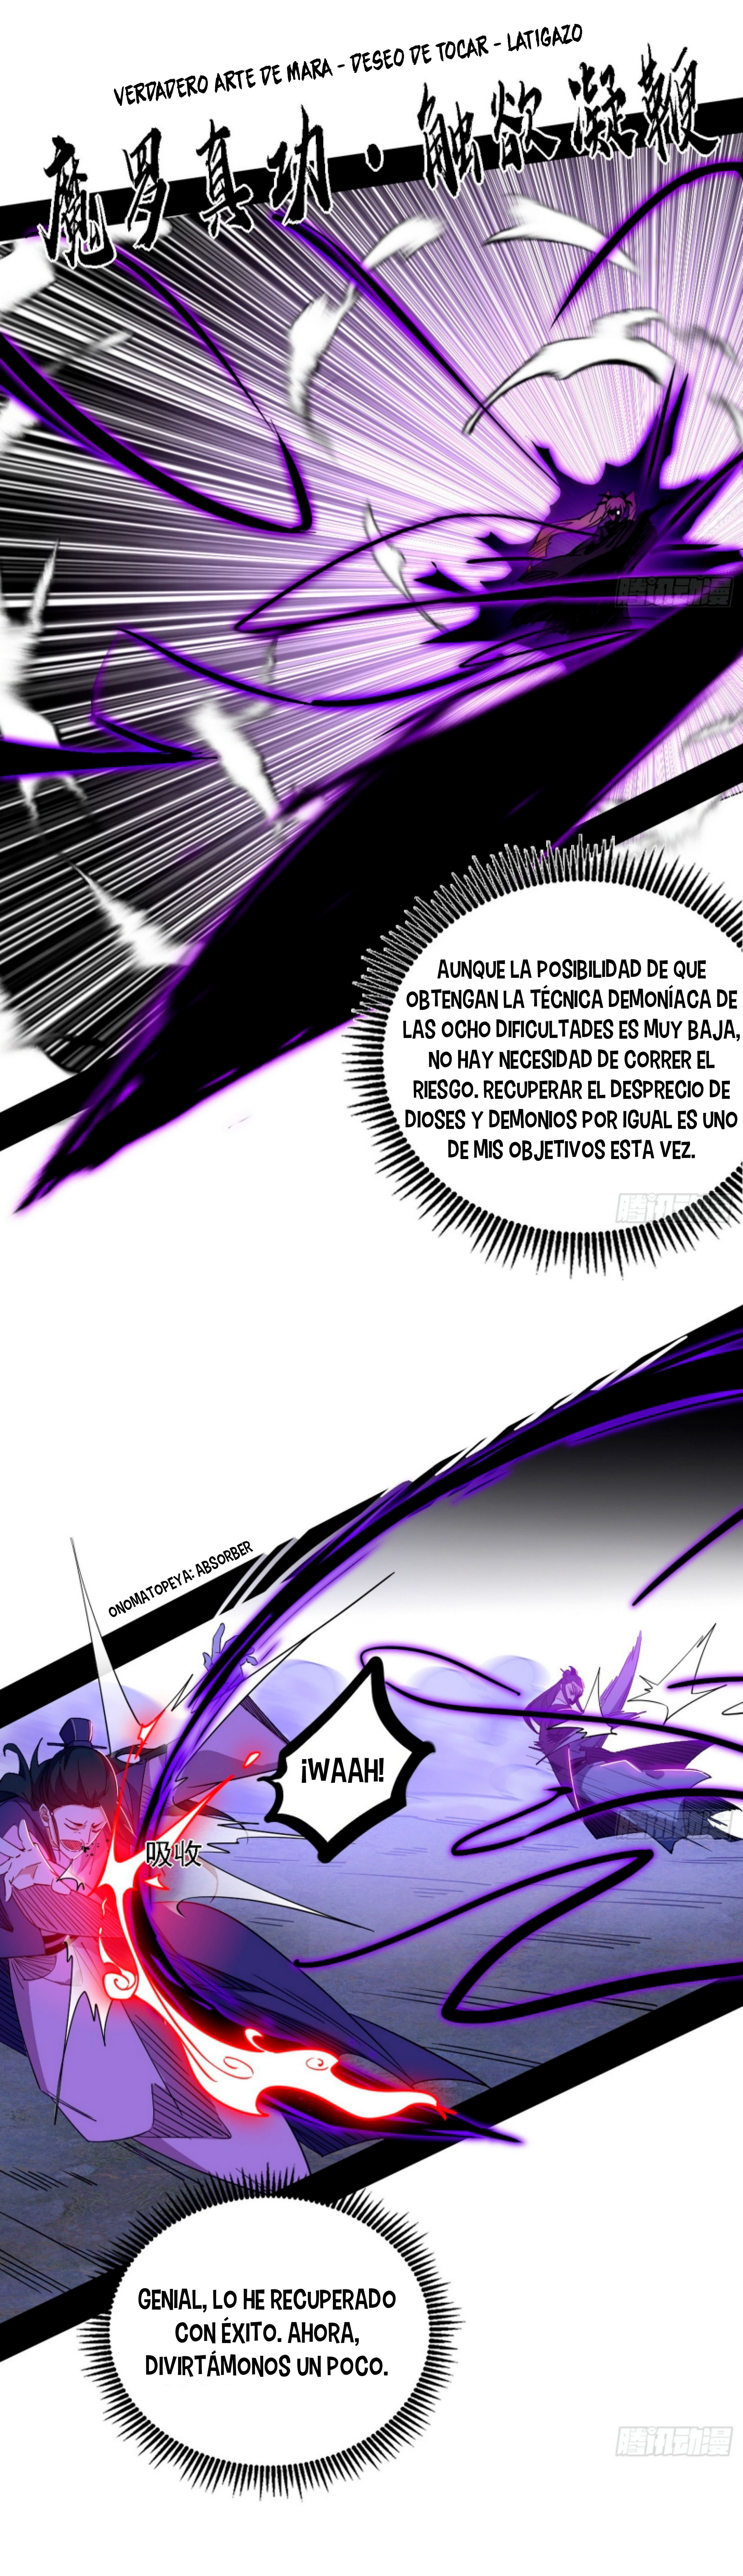 Manga Soy un dios maligno Chapter 407 image number 19